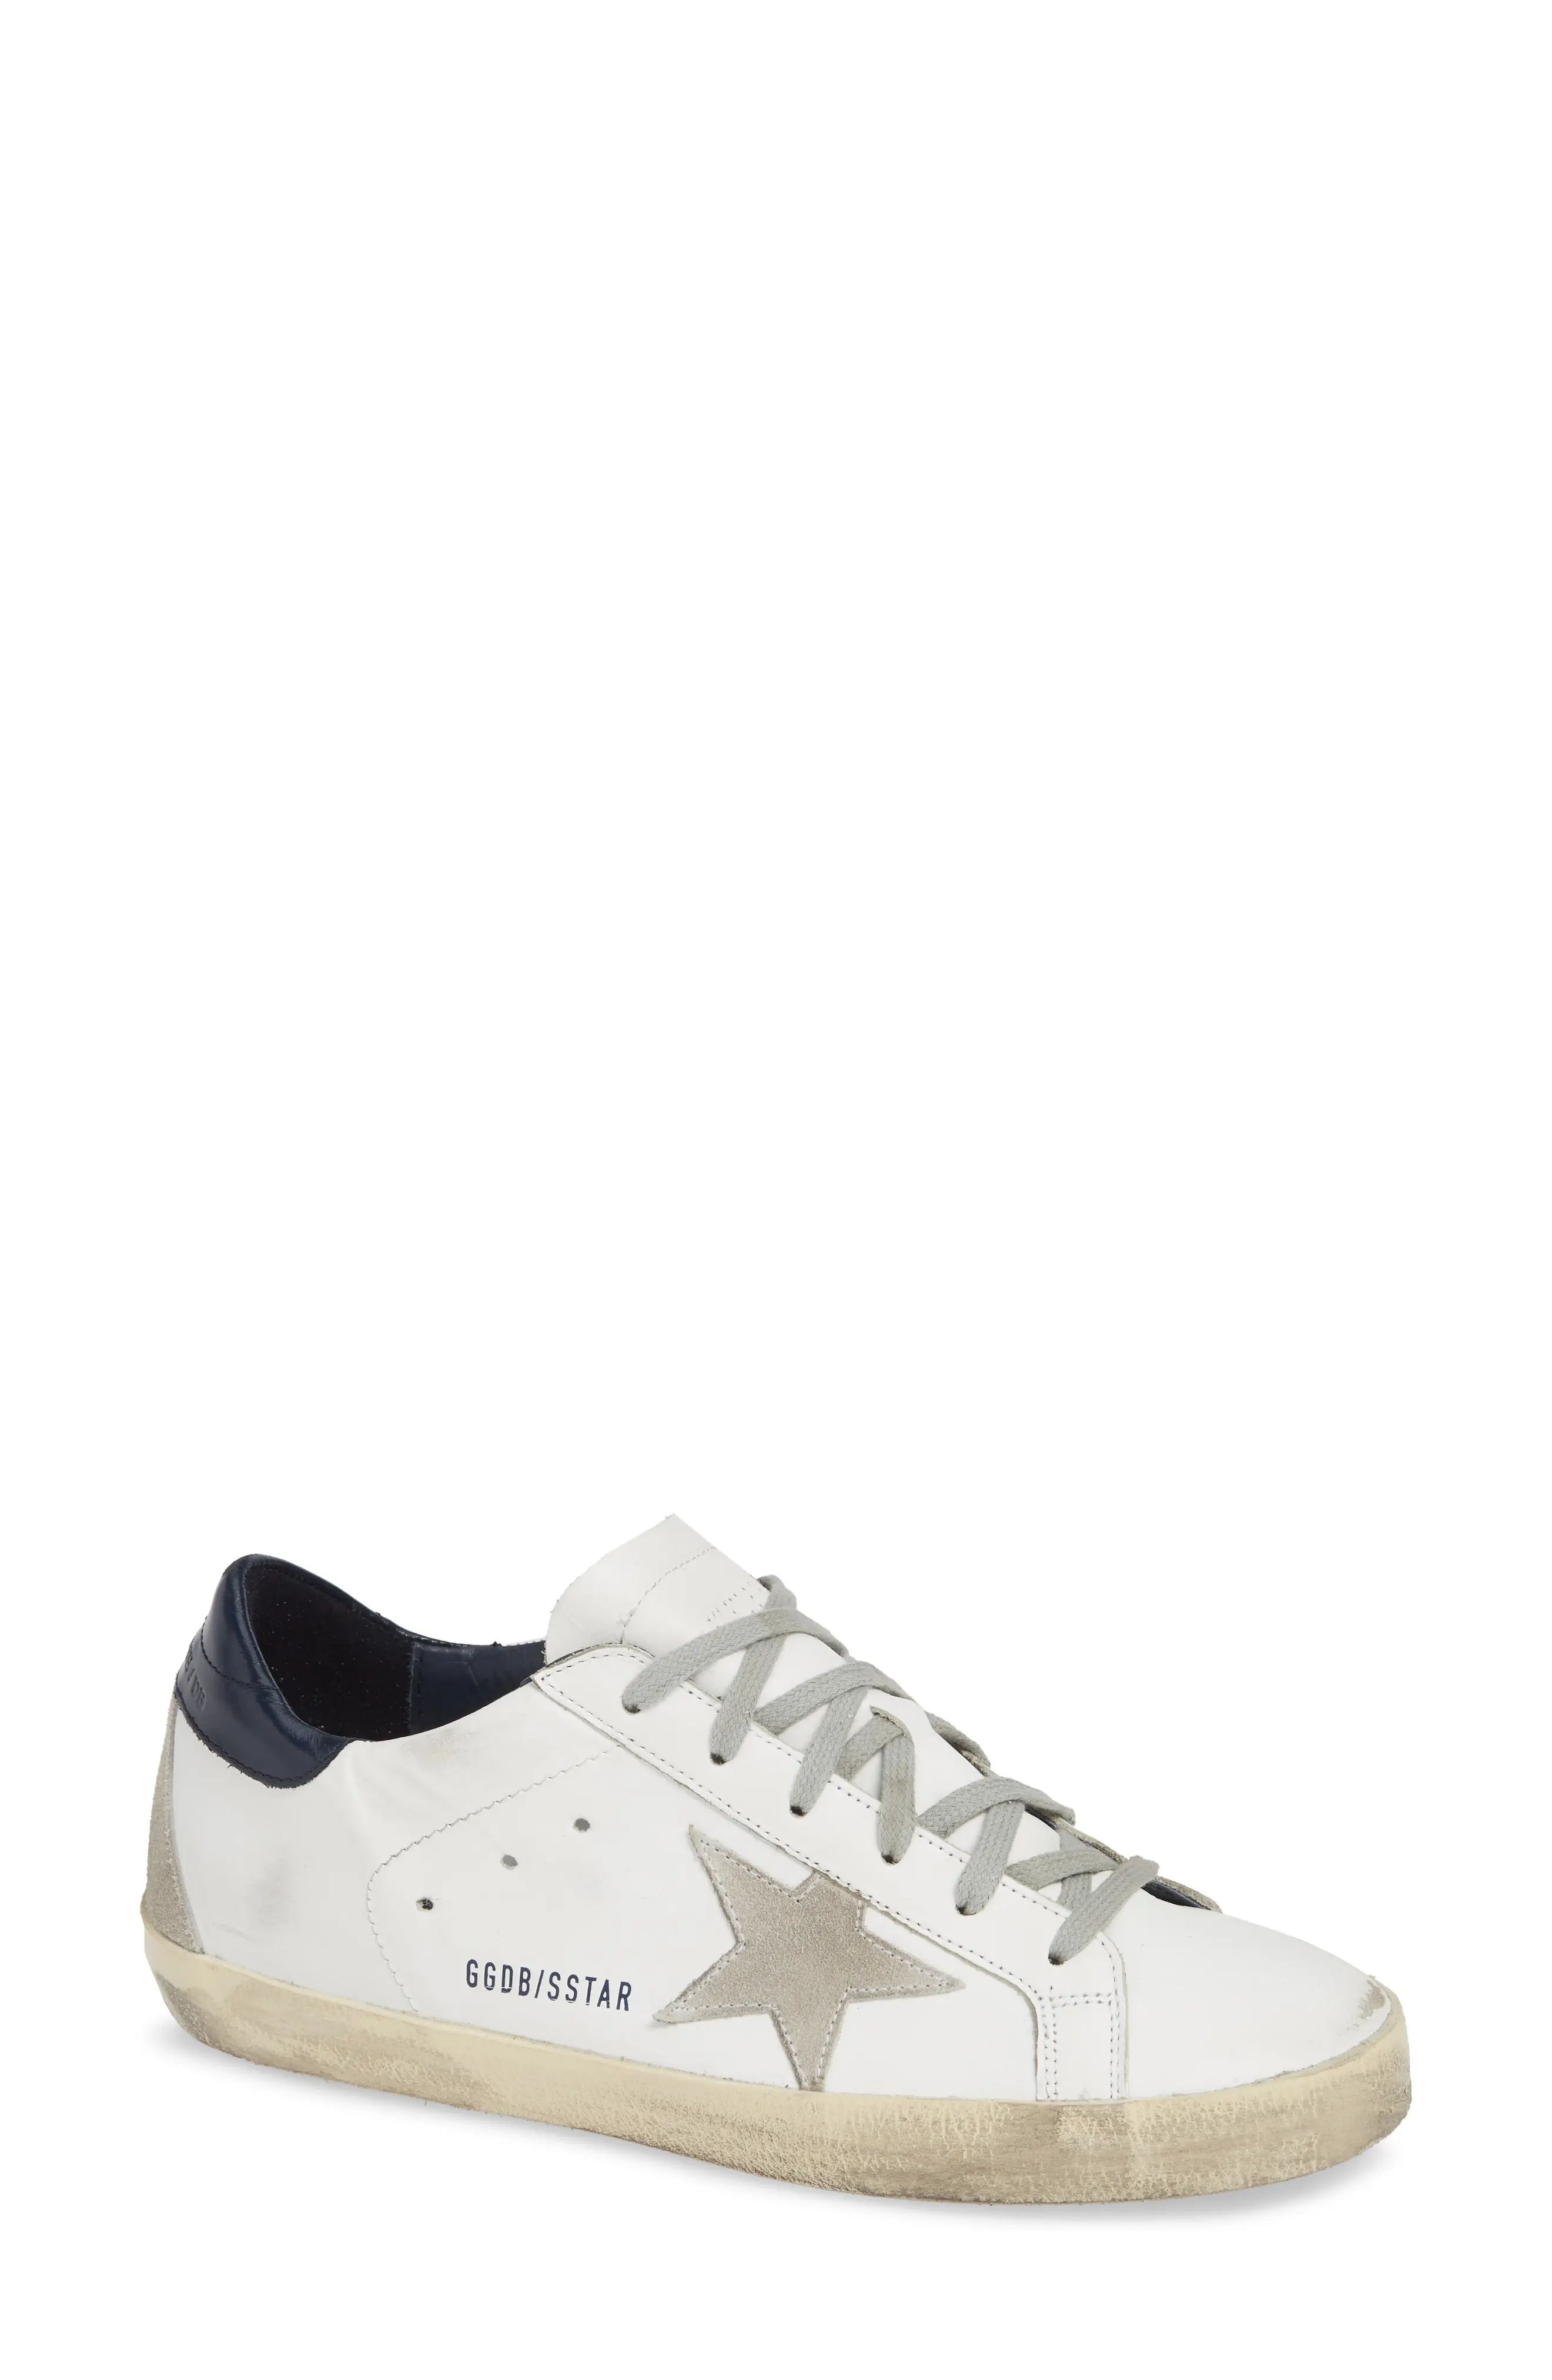 Golden Goose Super-Star Low Top Sneaker in White/Ice/Night Blue at Nordstrom, Size 11Us | Nordstrom